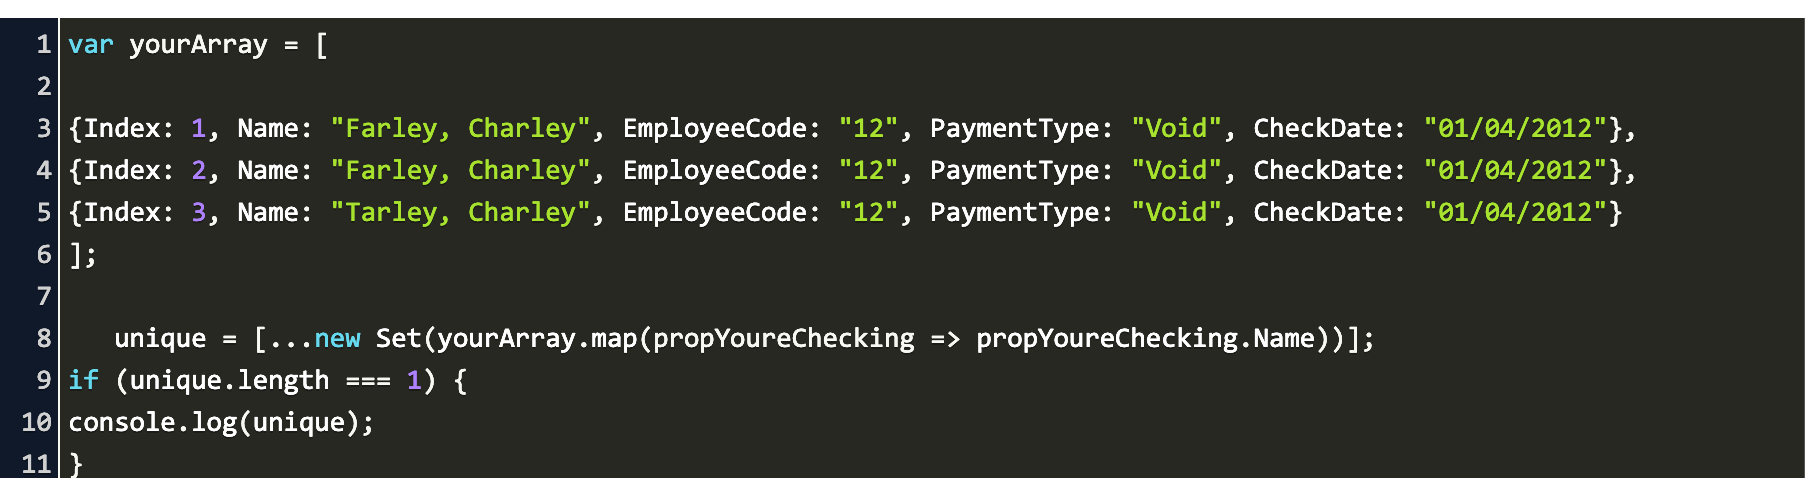 array of objects how to check if property has duplicate Code Example